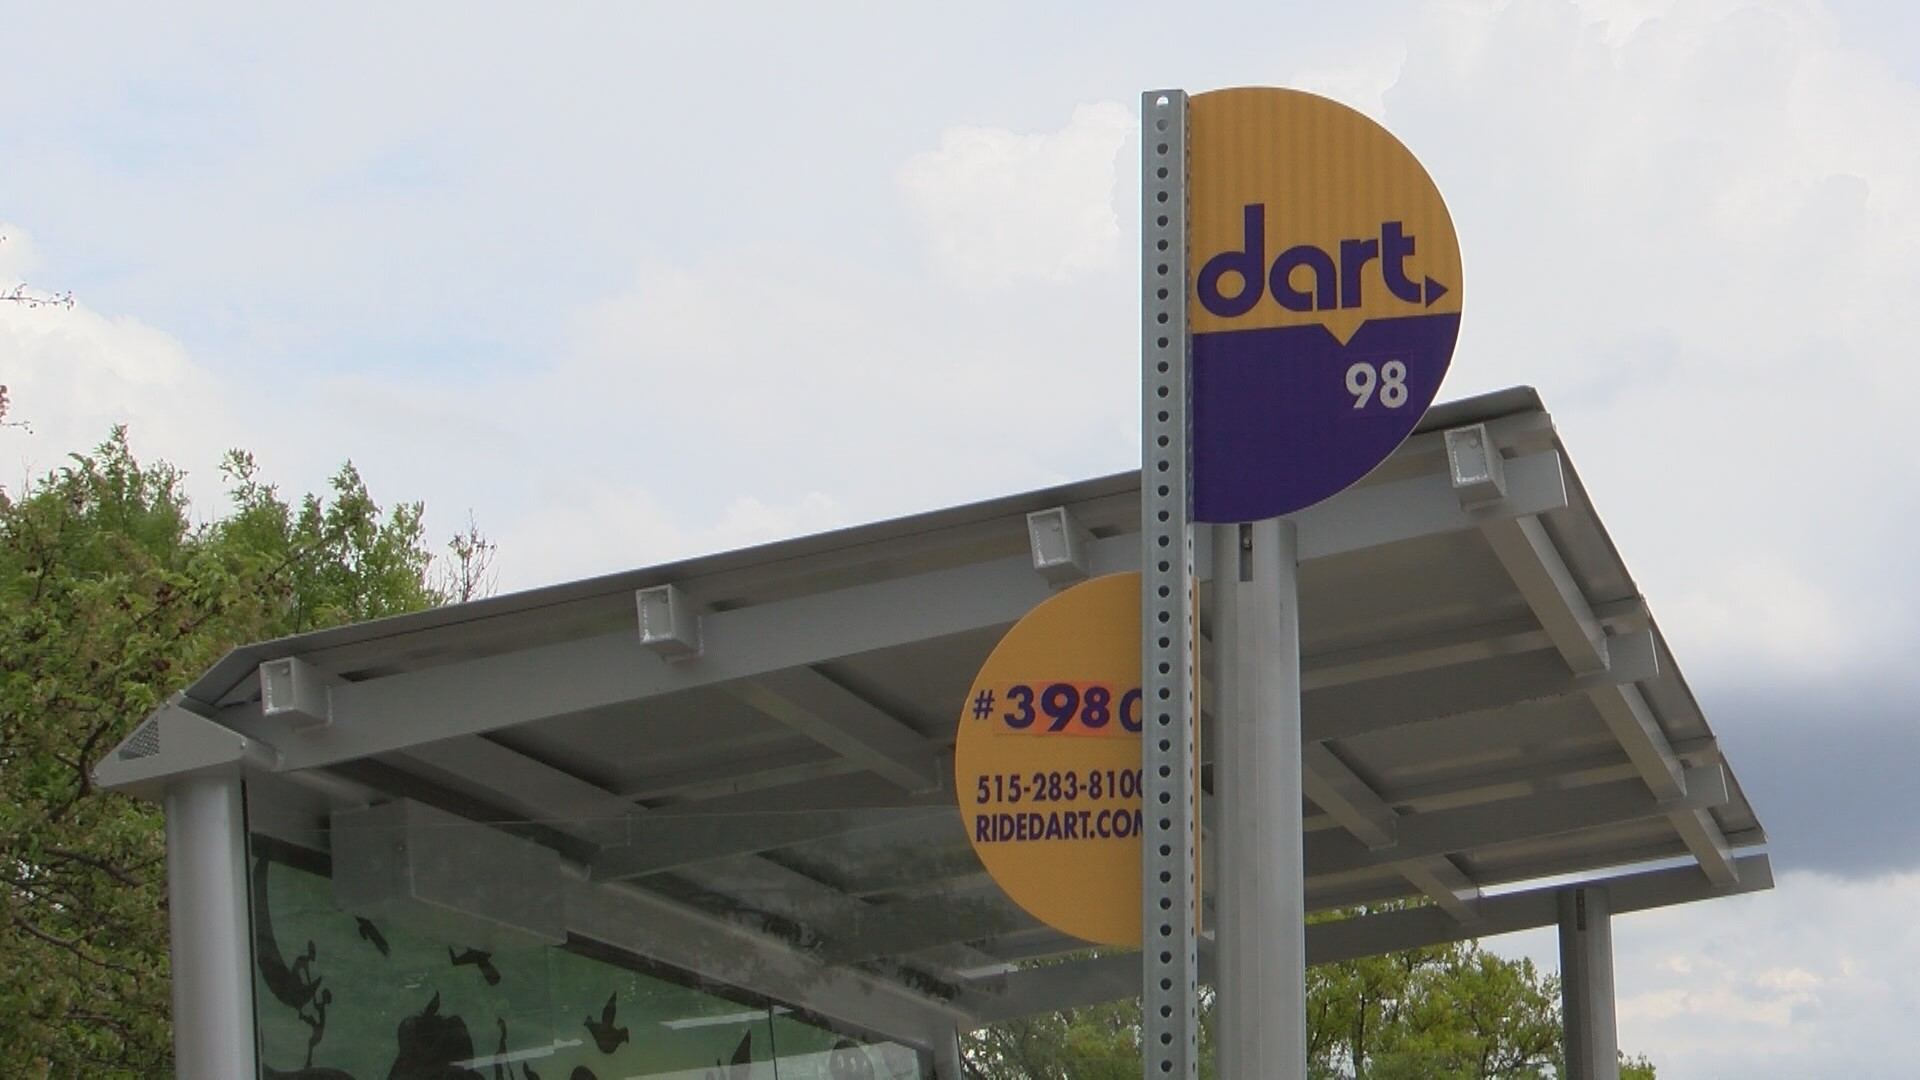 While DART is considering a plan to cut down their bus services in Des Moines by 40%, residents told the Des Moines City Council that isn't a fair decision.